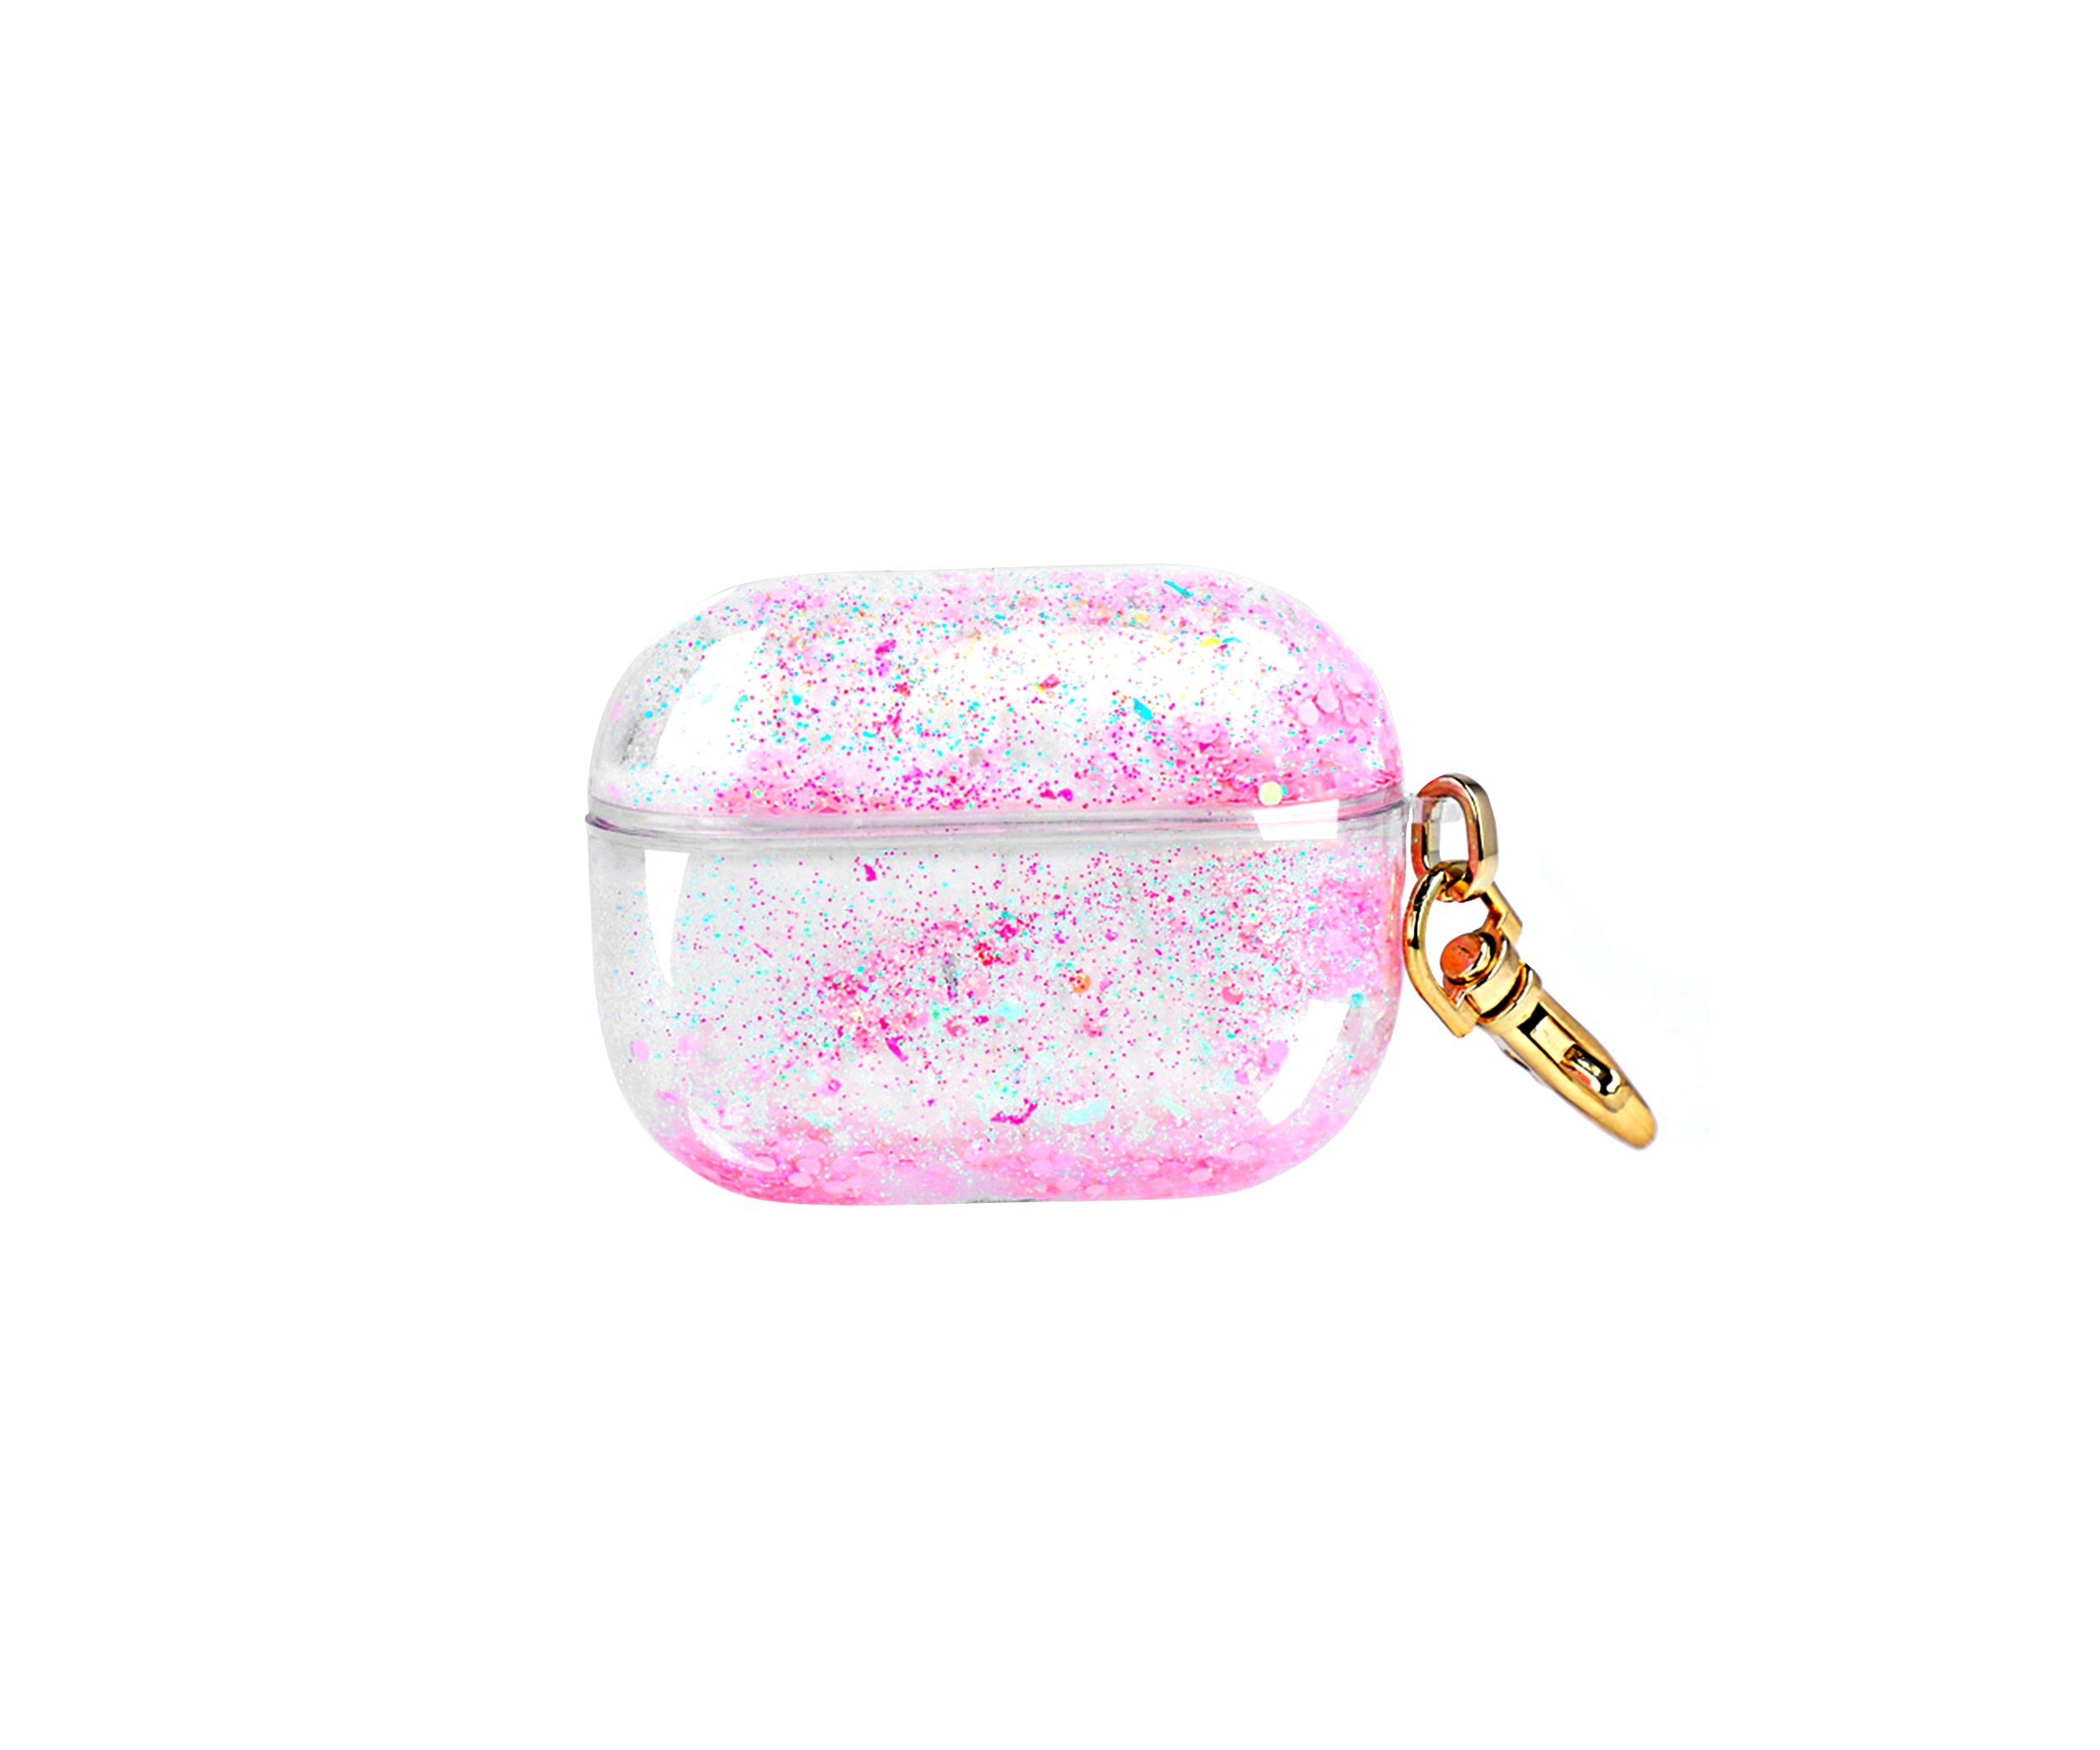 How to Clean and Care for Your Glitter AirPods Cases ?